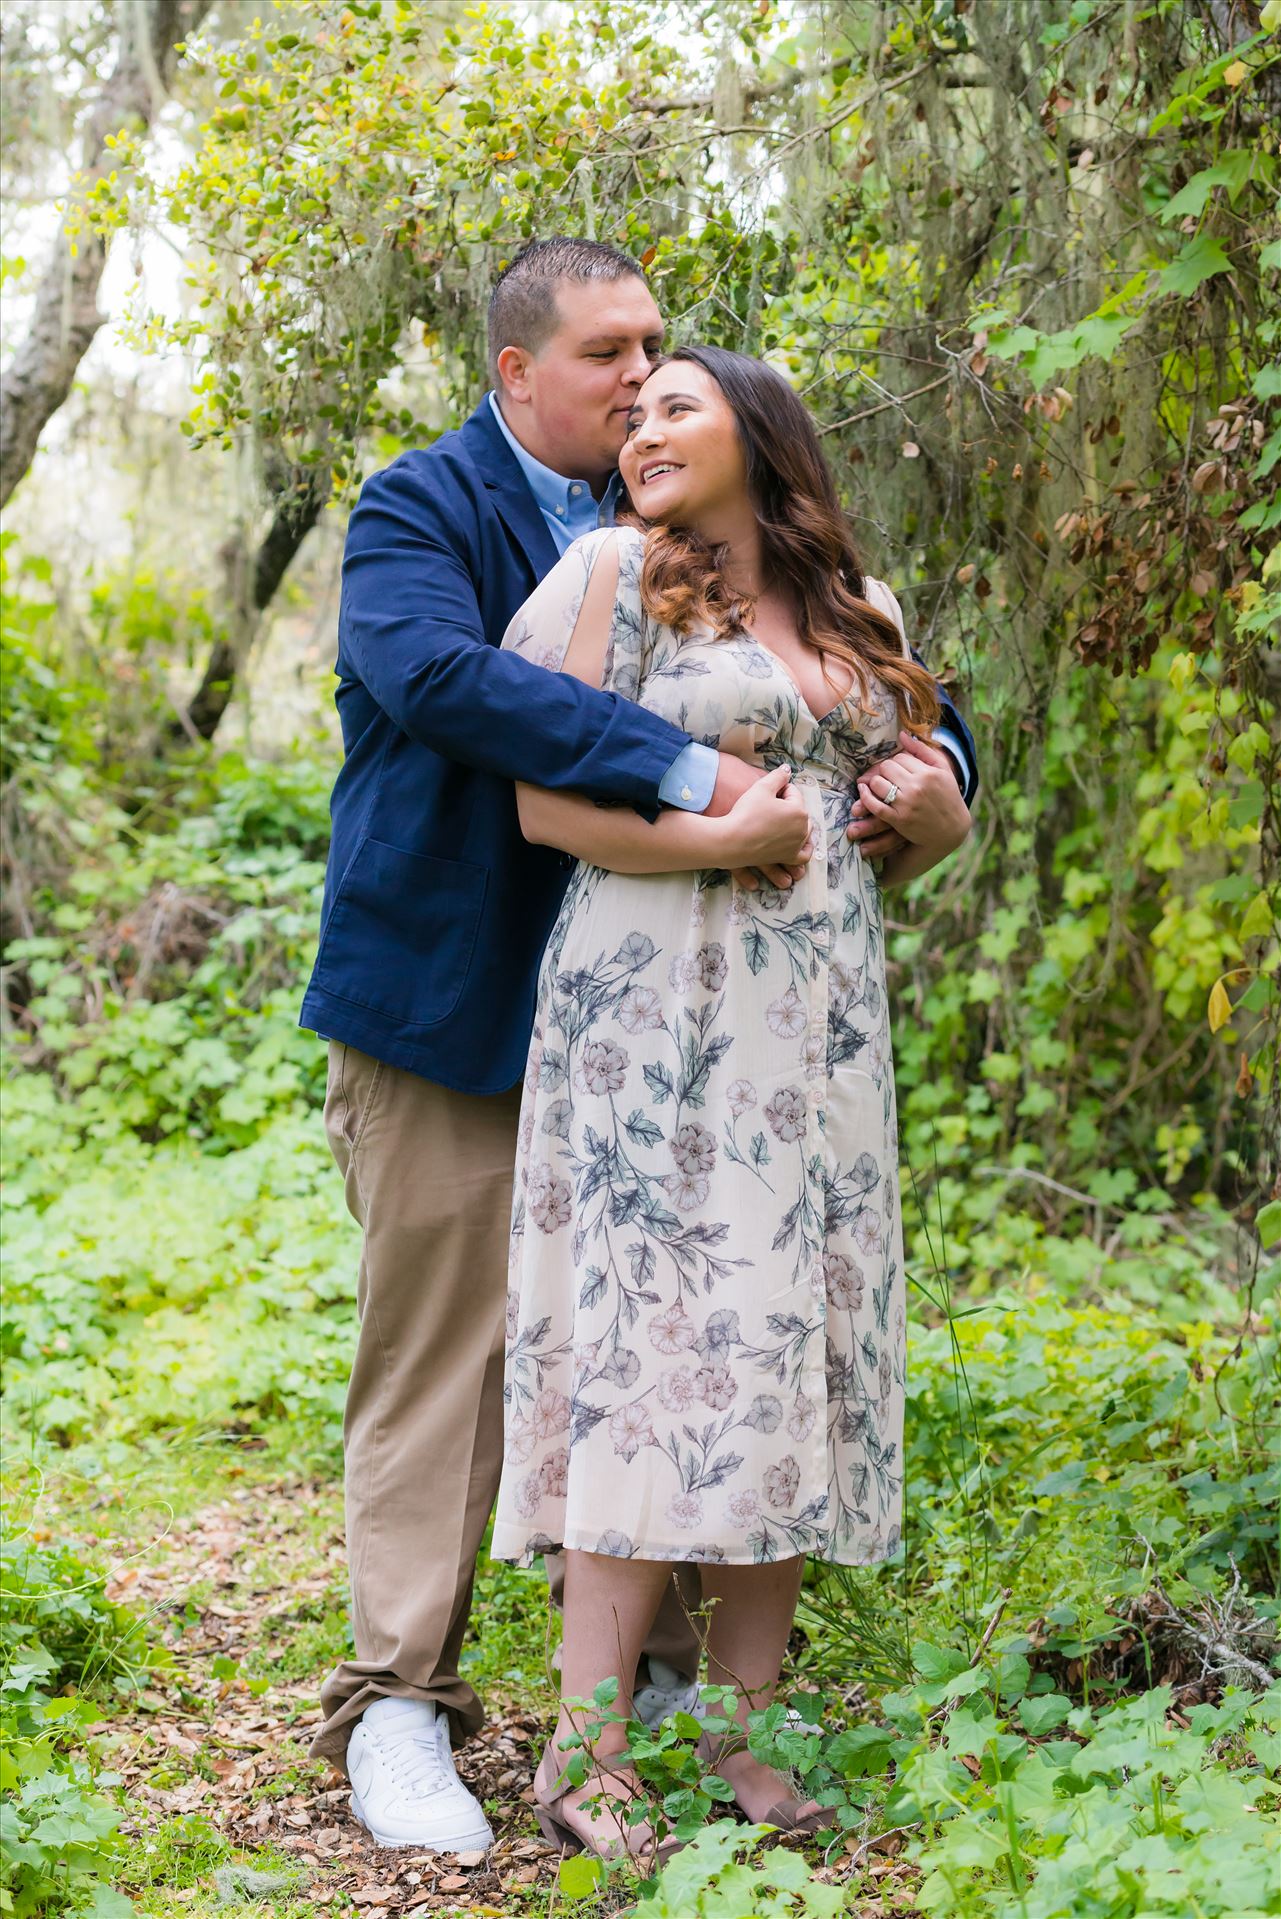 DSC_3148.JPG - Los Osos Oaks Nature Reserve Engagement Photography Session by Mirror's Edge Photography.  Romantic engagement in the trees on the Central Coast of California by Sarah Williams